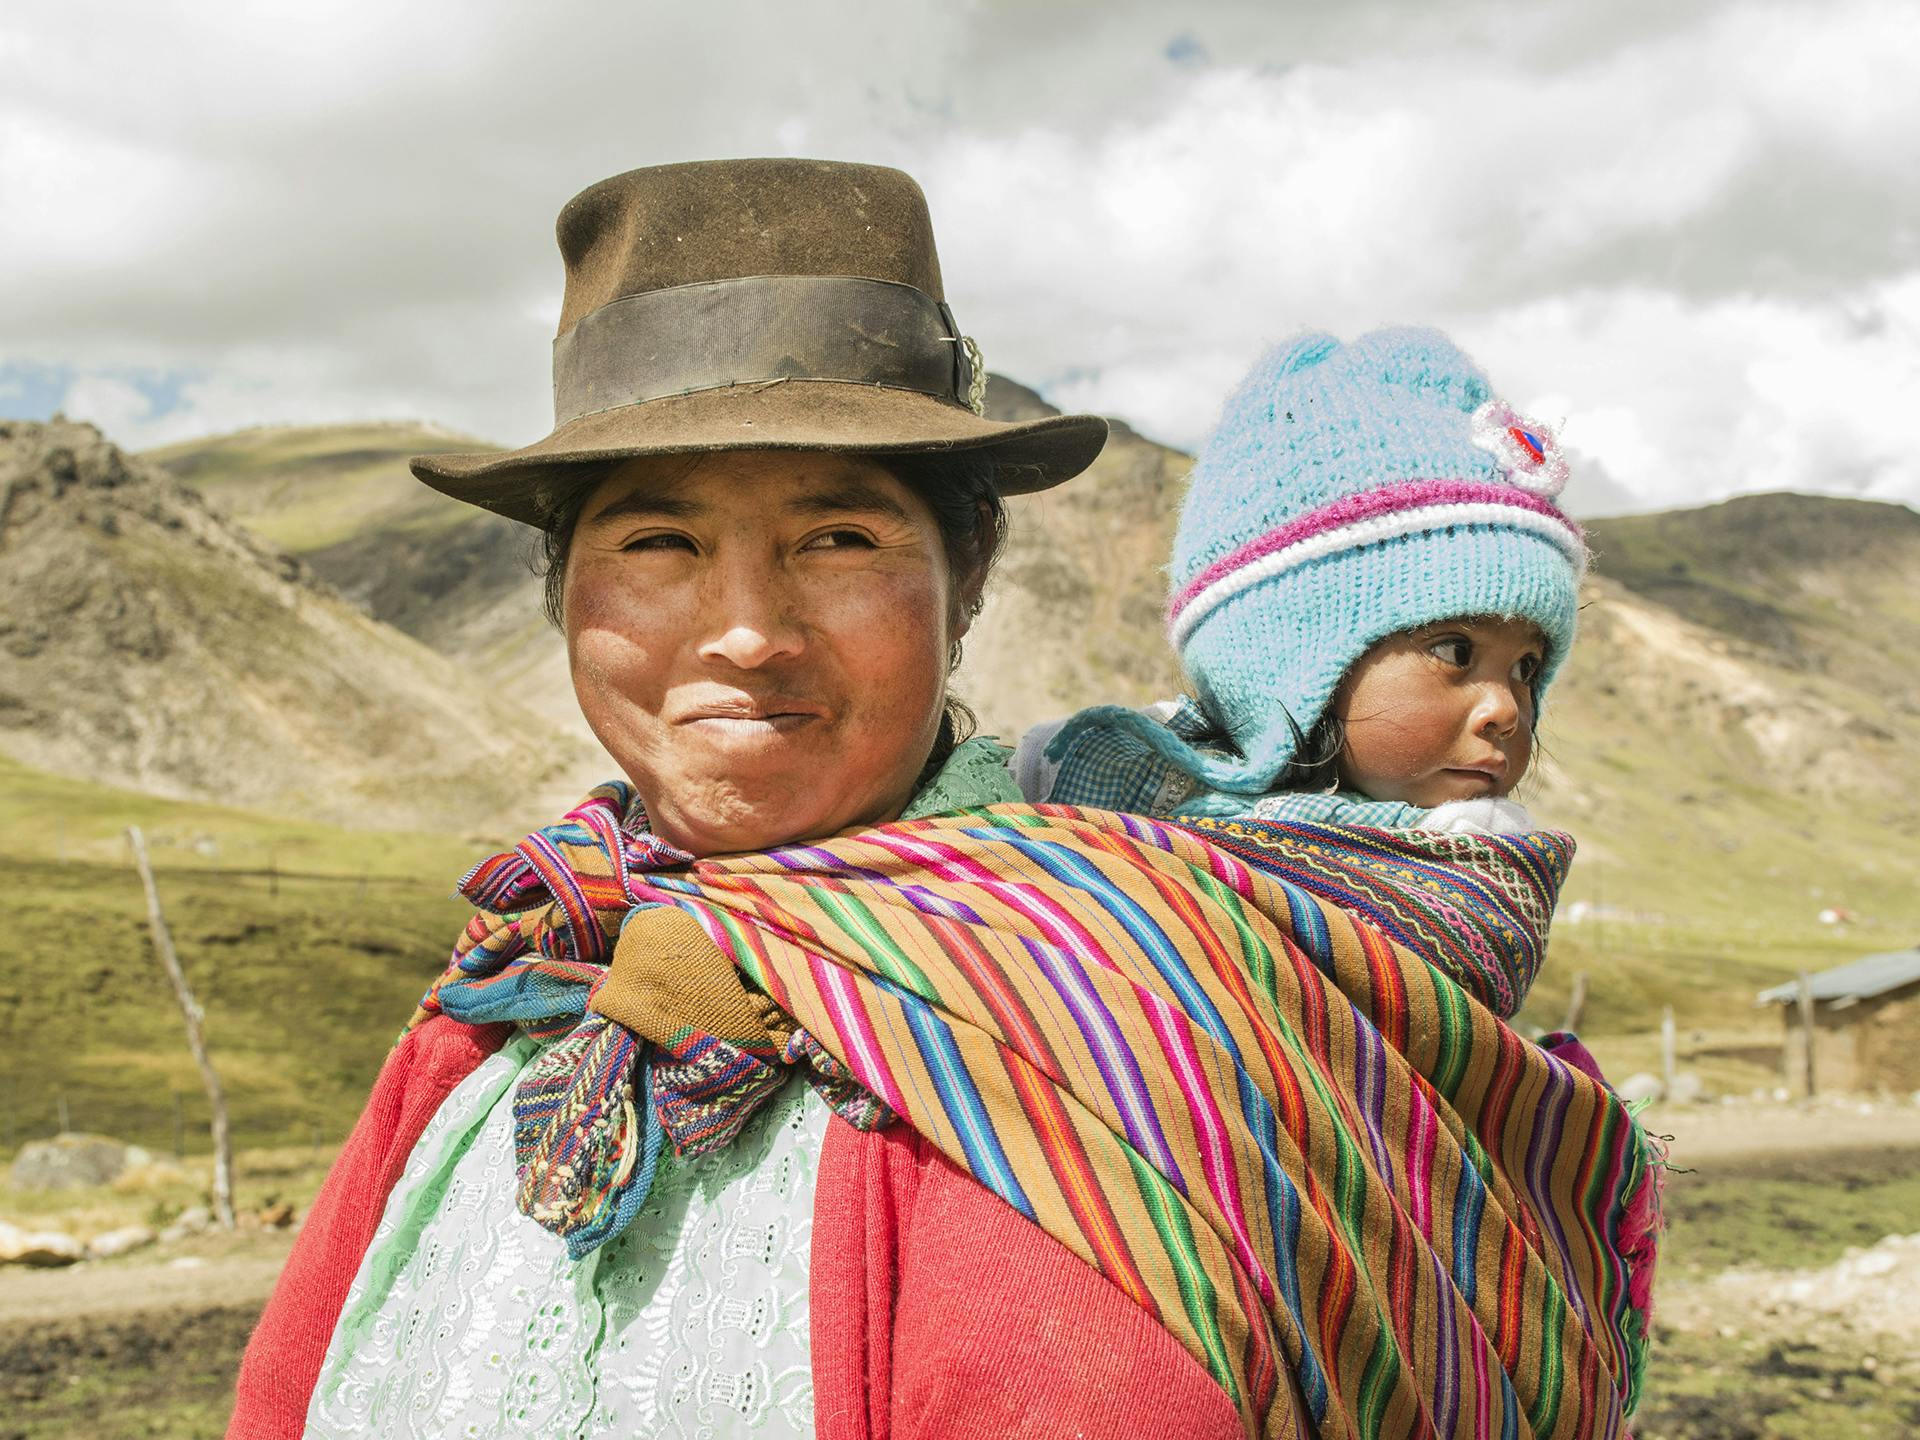 A Peruvian woman in a hat wearing a baby on her back.